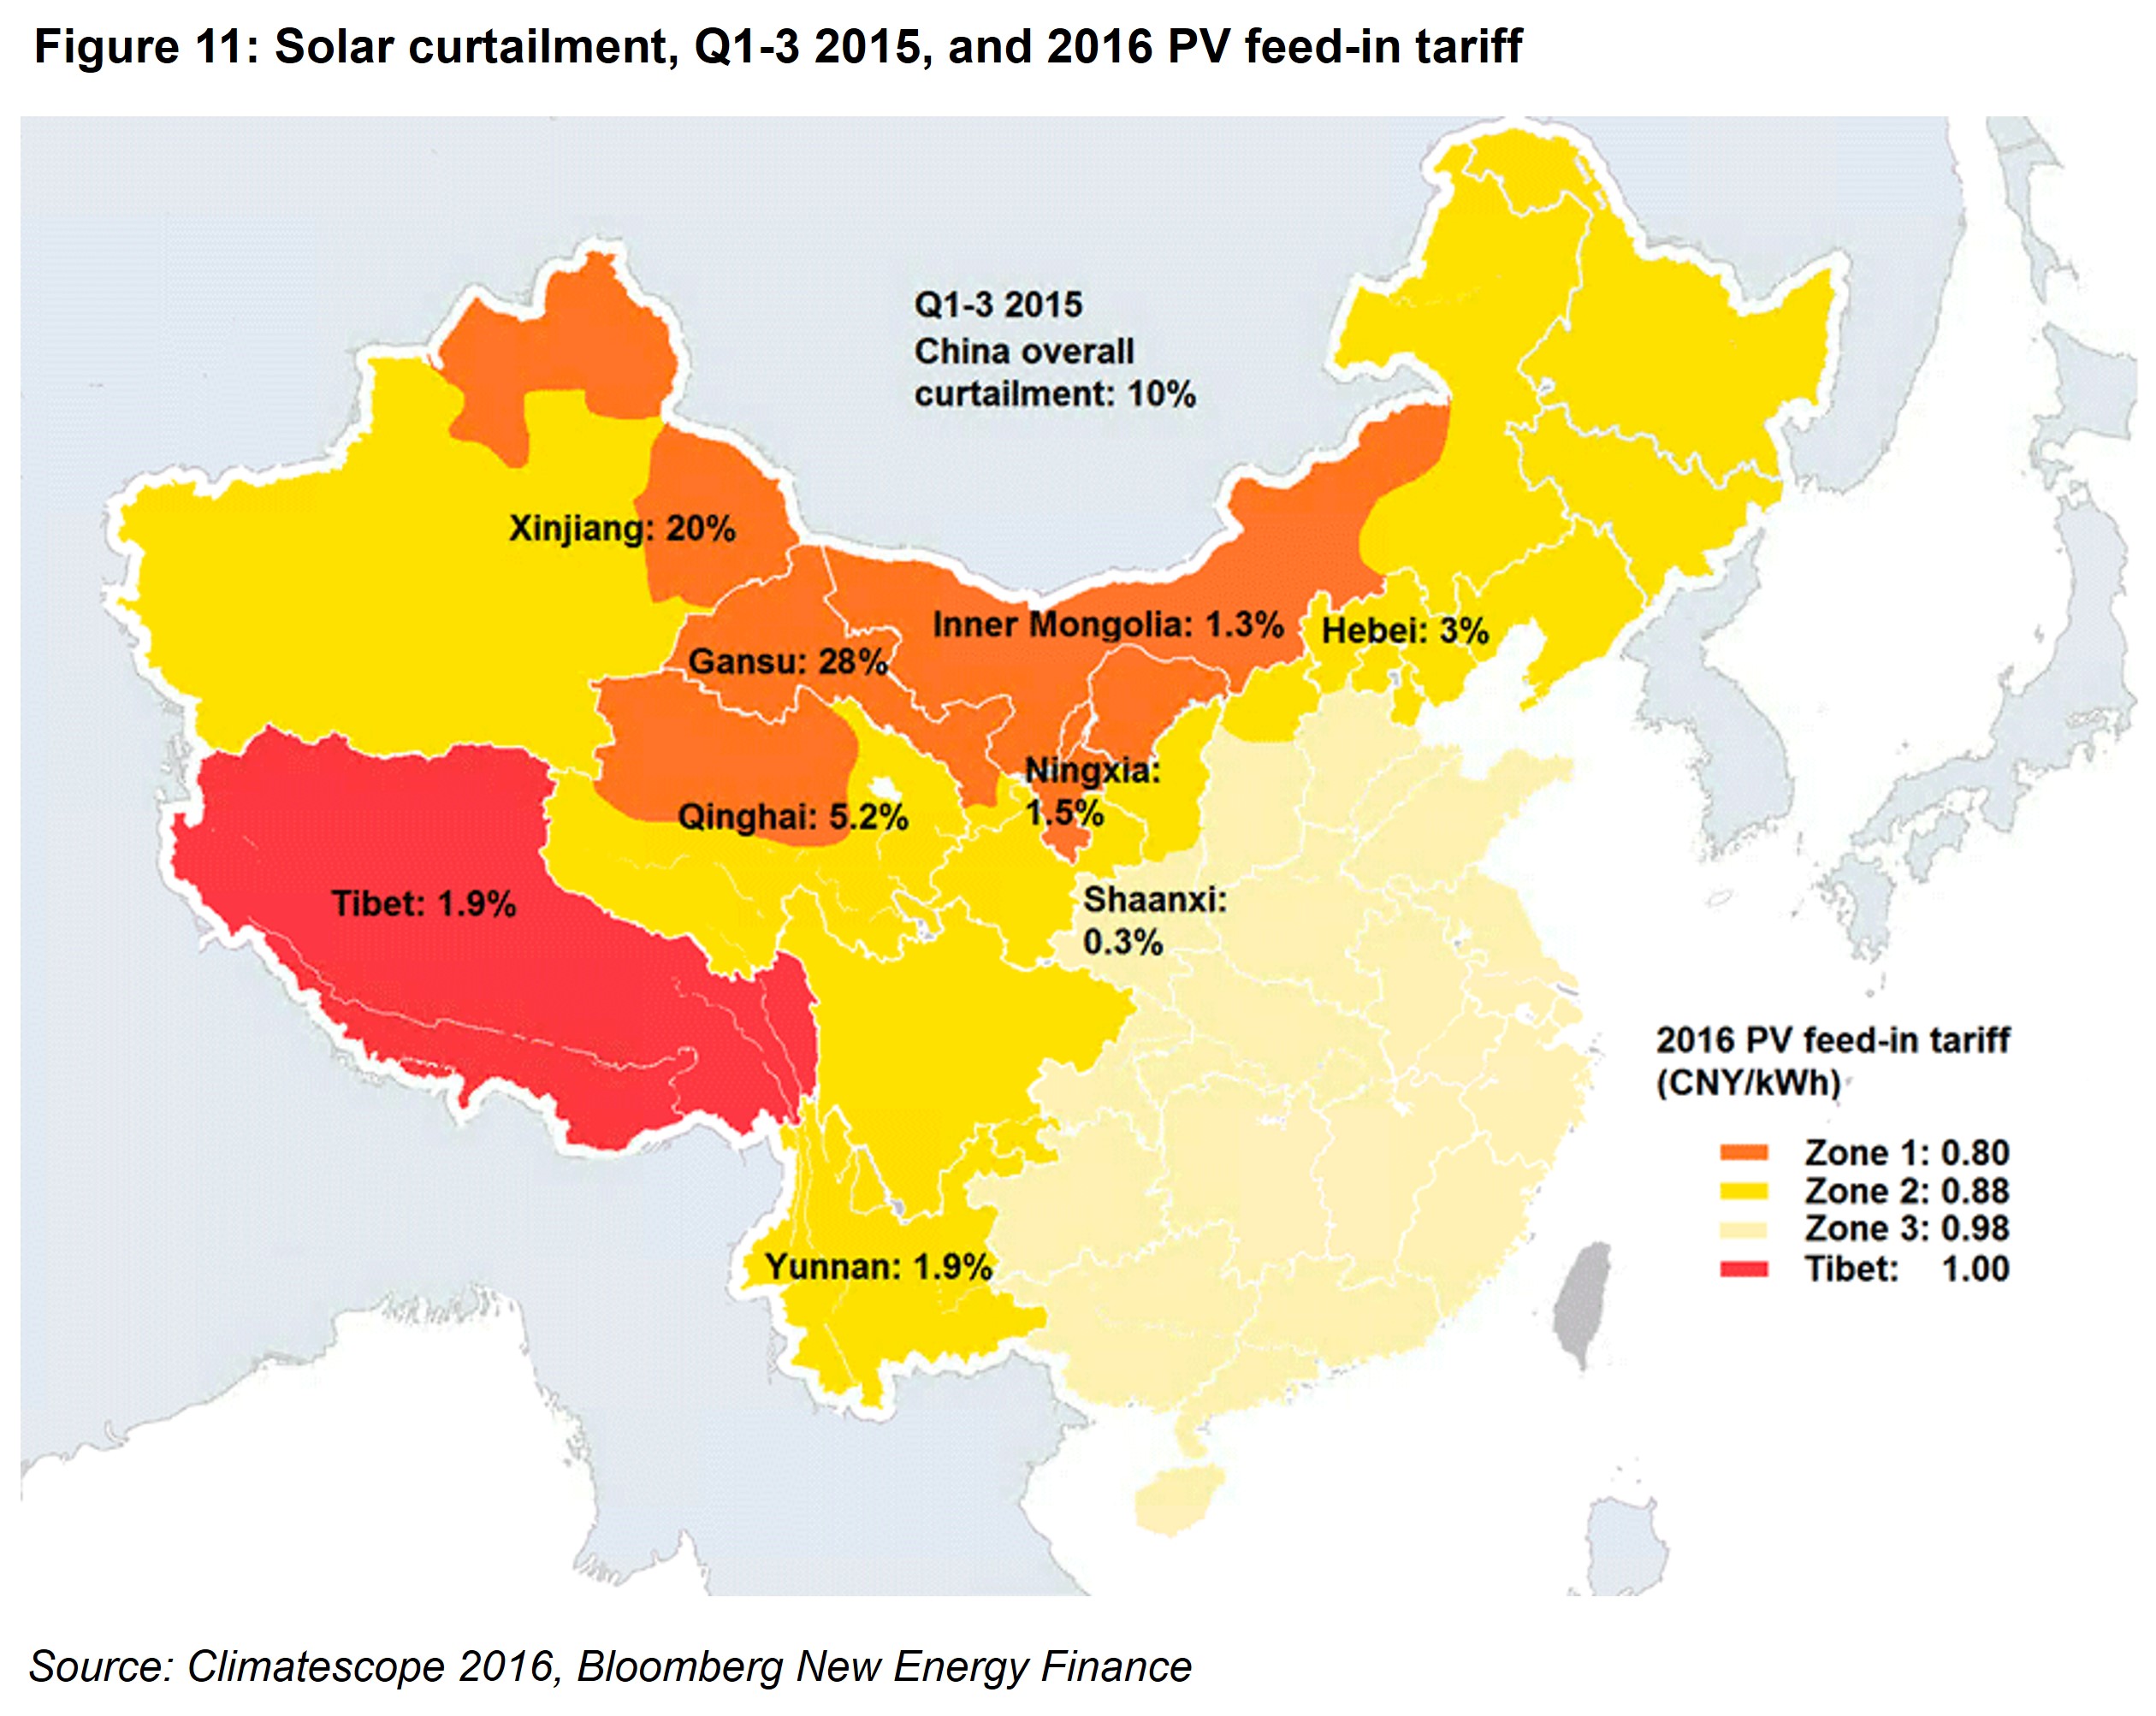 Executive Summary Fig 11 - Solar curtailment, Q1-3 2015, and 2016 PV feed-in tariff